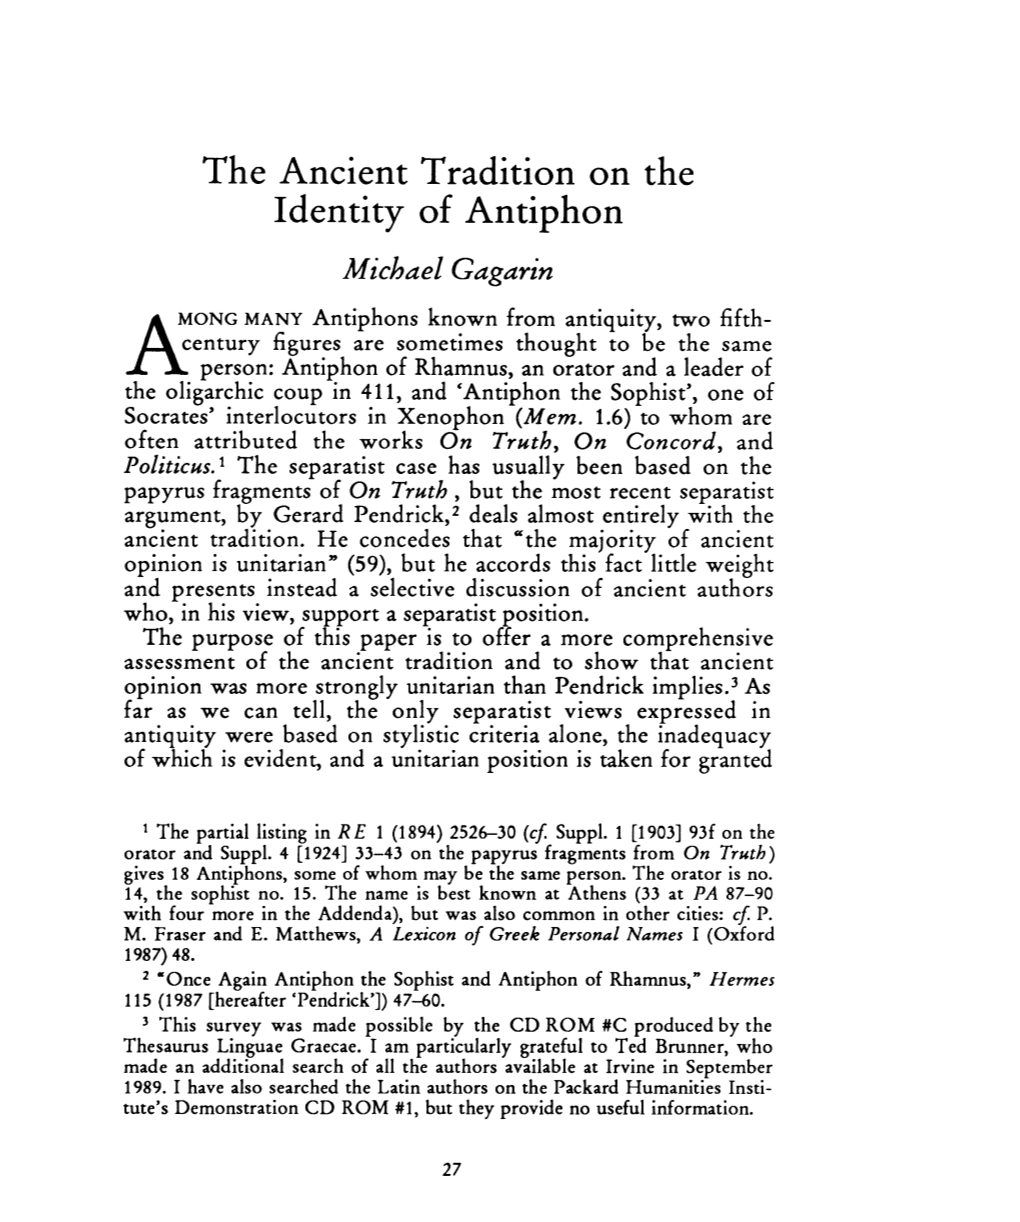 The Ancient Tradition on the Identity of Antiphon , Greek, Roman and Byzantine Studies, 31:1 (1990:Spring) P.27